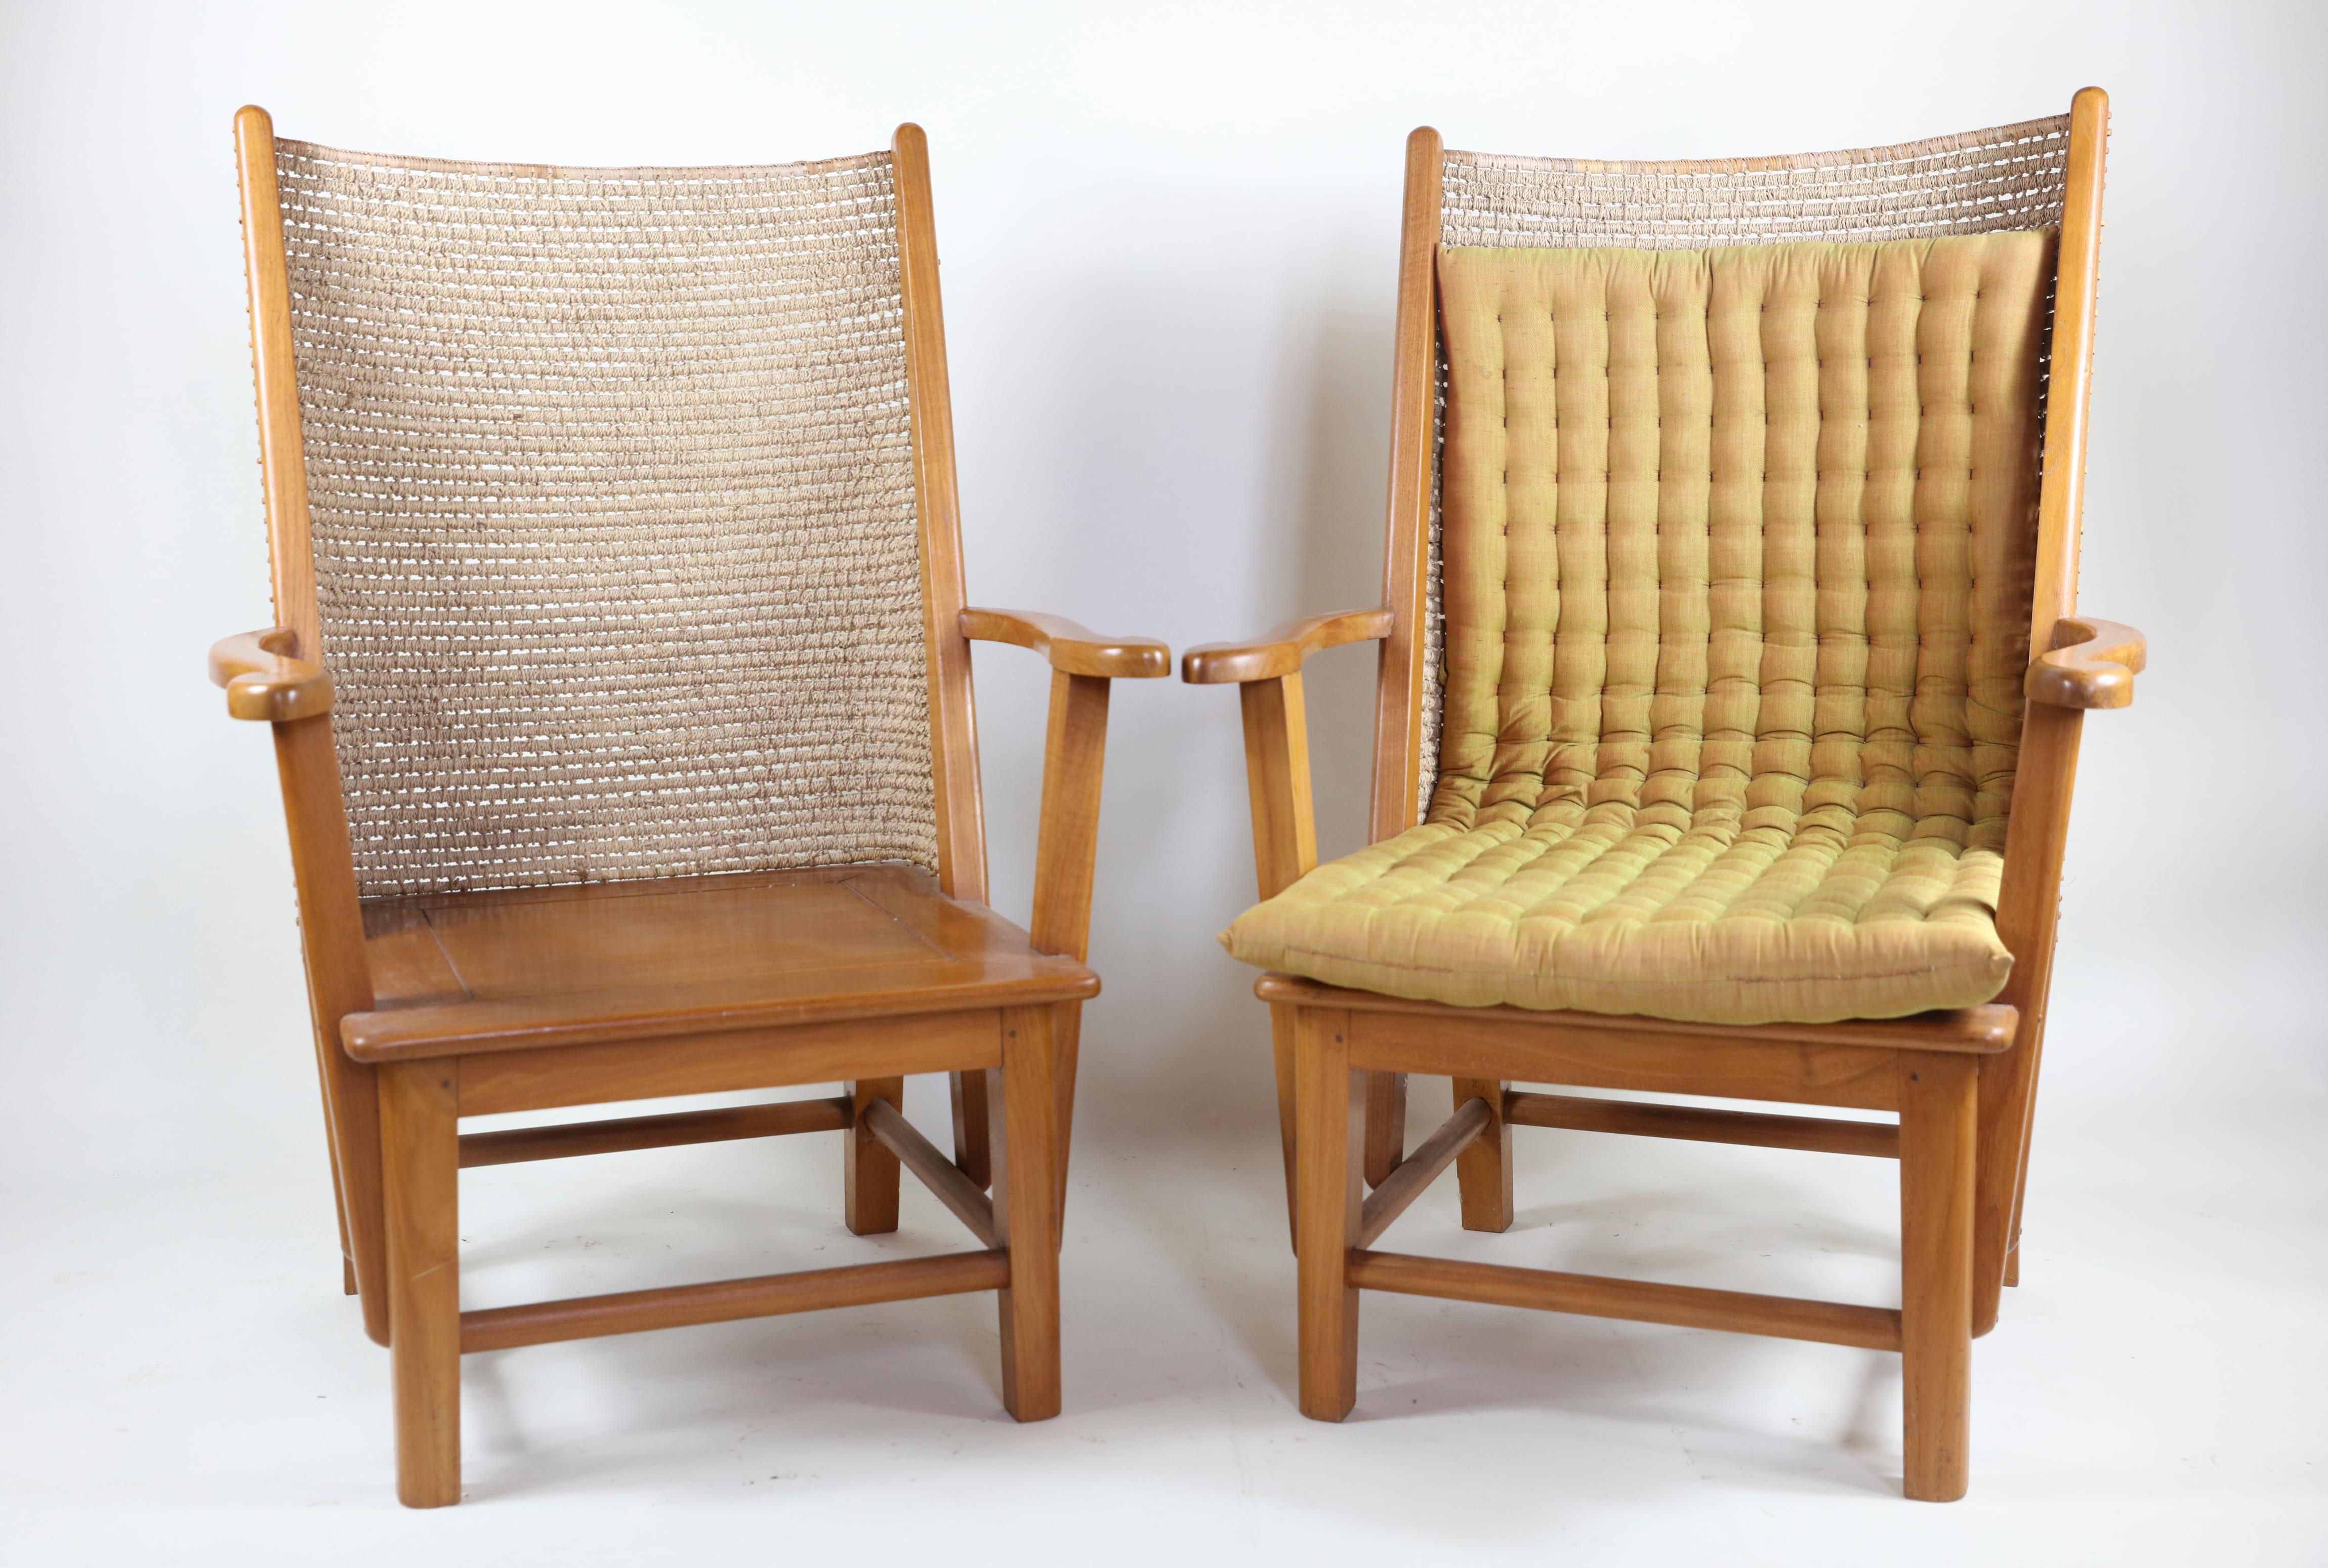 Brown Pair of Woven Jute High Back Chairs with Cushions